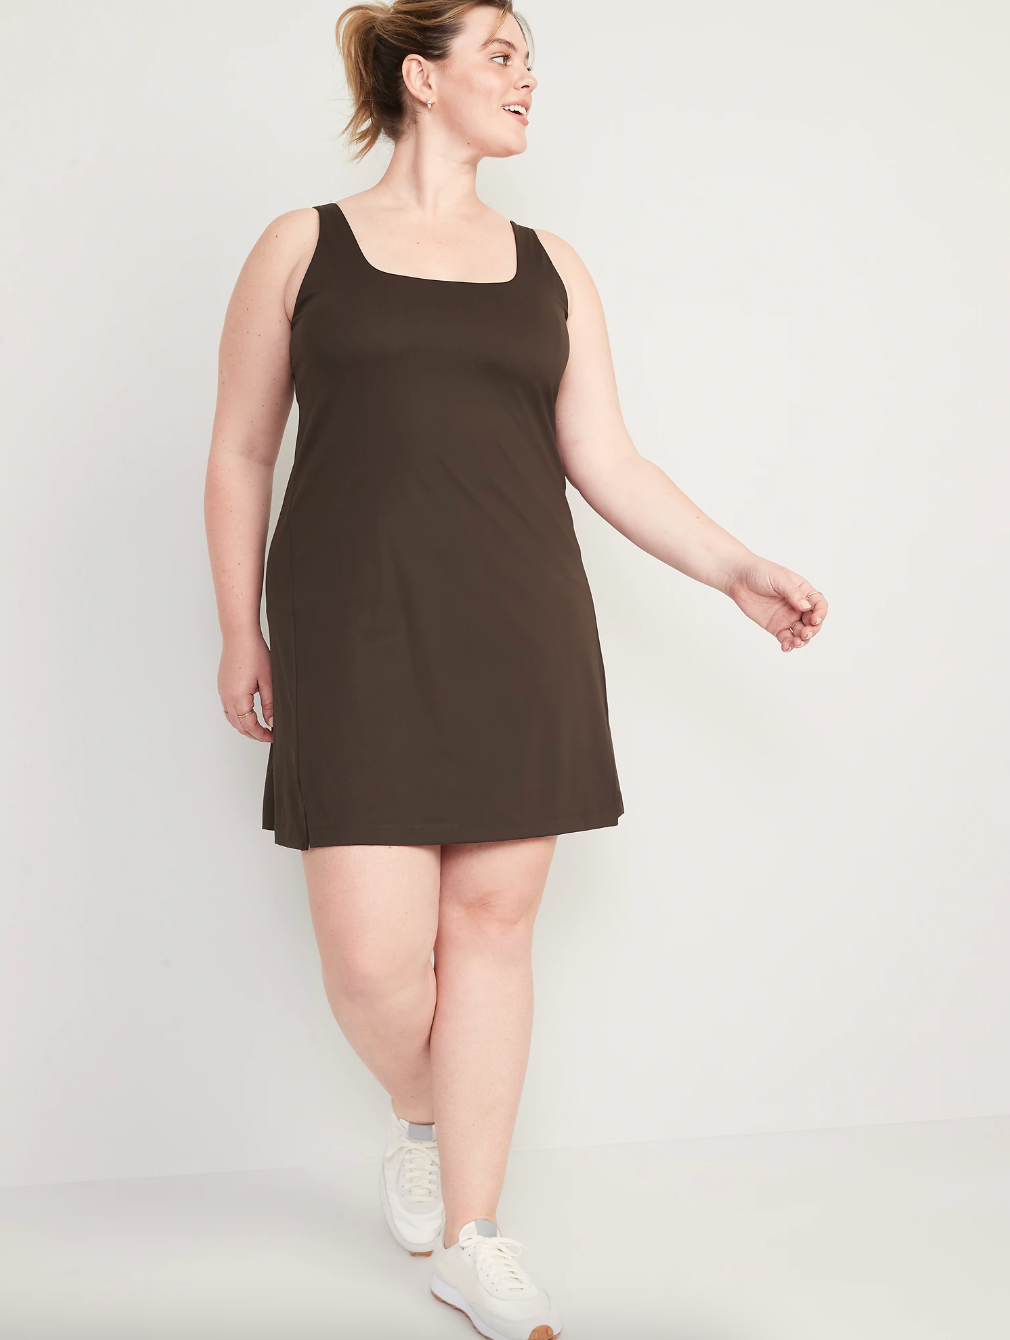 model wearing the square neck dress in brown